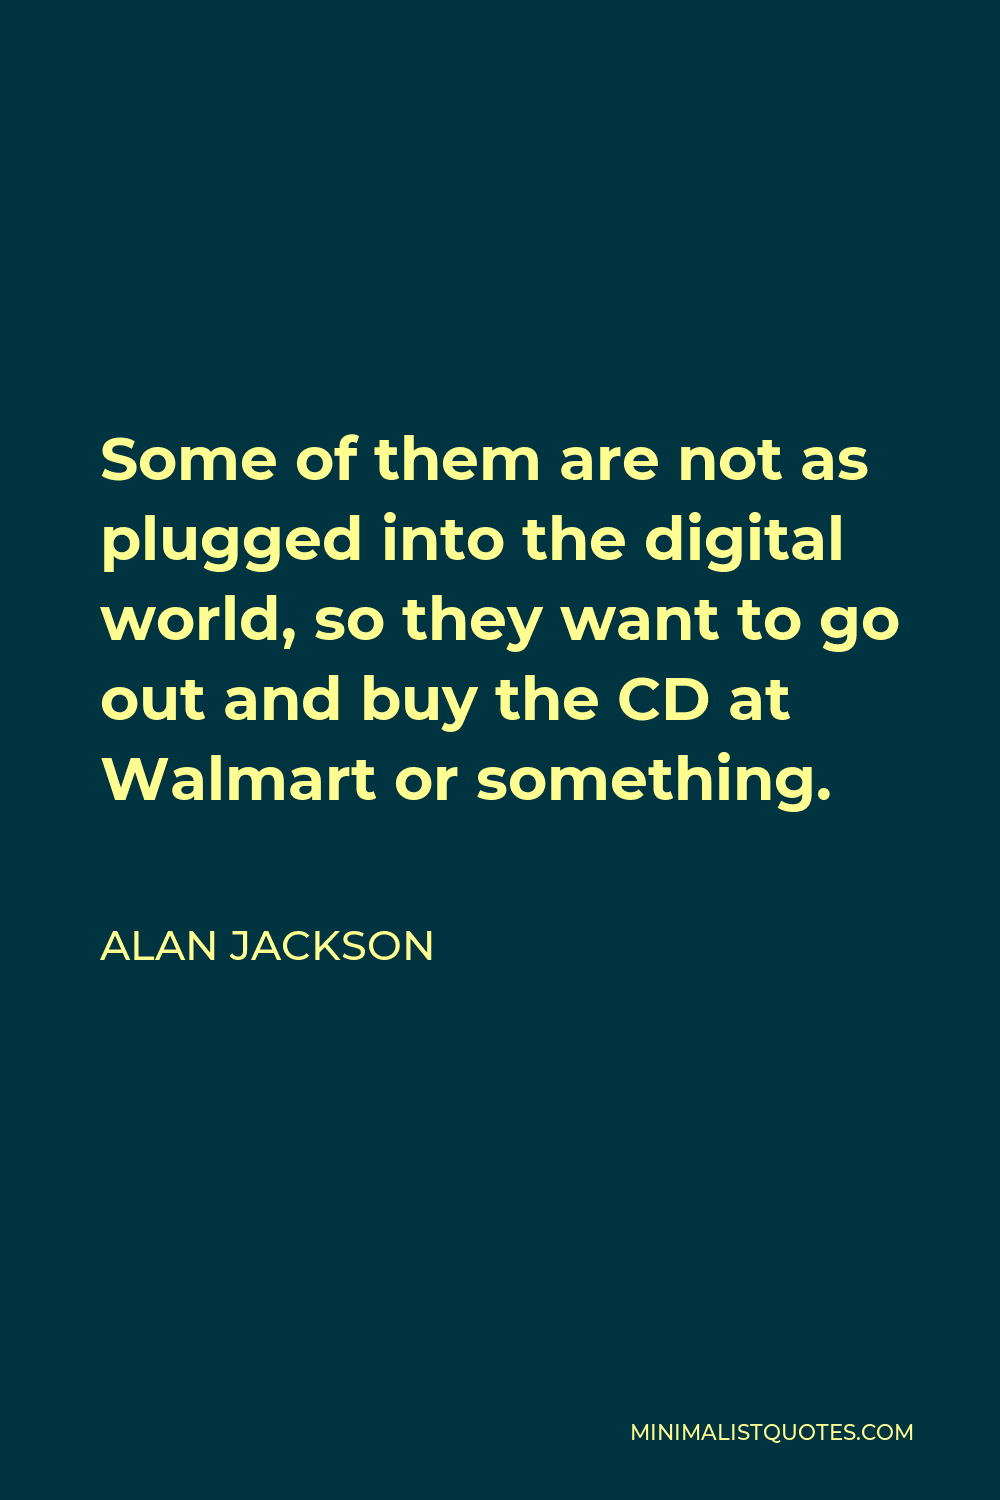 Alan Jackson Quote - Some of them are not as plugged into the digital world, so they want to go out and buy the CD at Walmart or something.